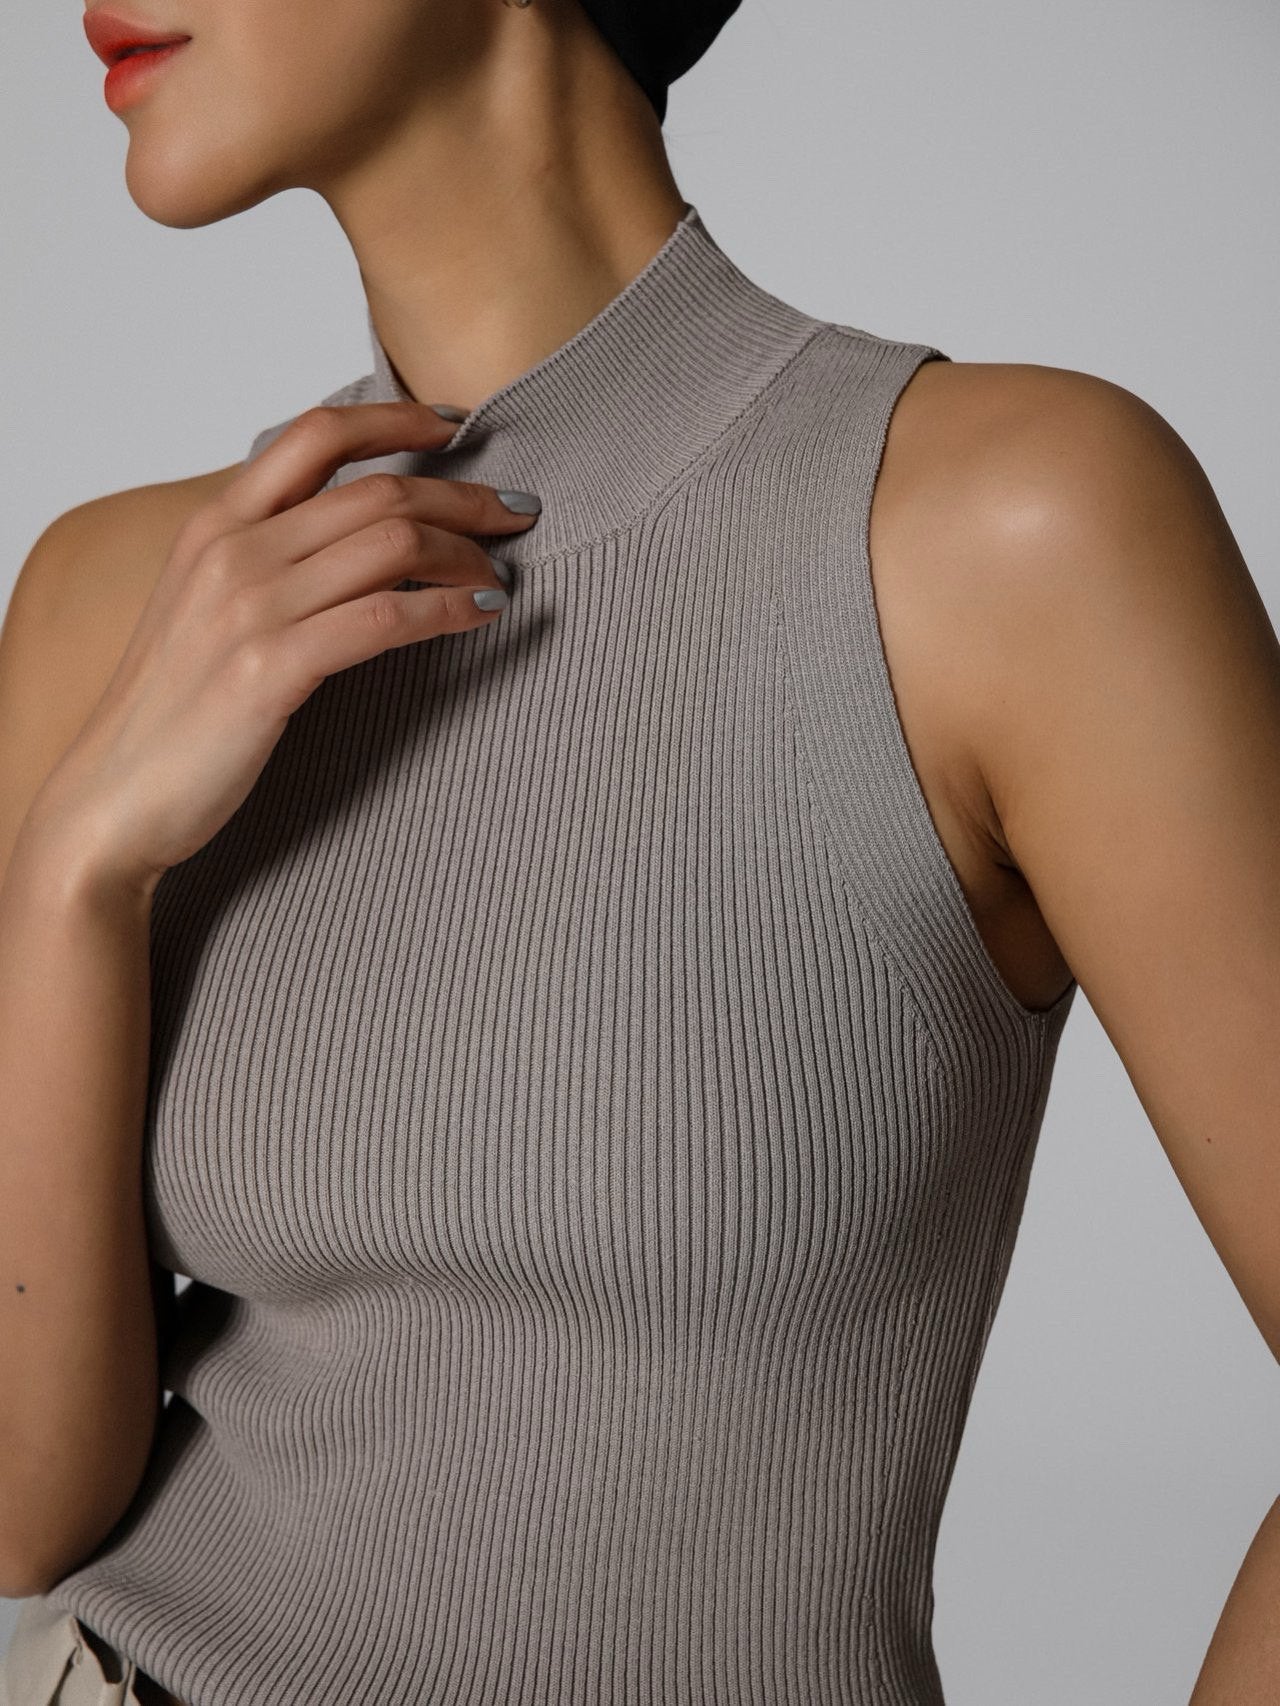 【PAPERMOON 페이퍼 문】SS / High Neck Ribbed Sleeveless Cropped Knit Top